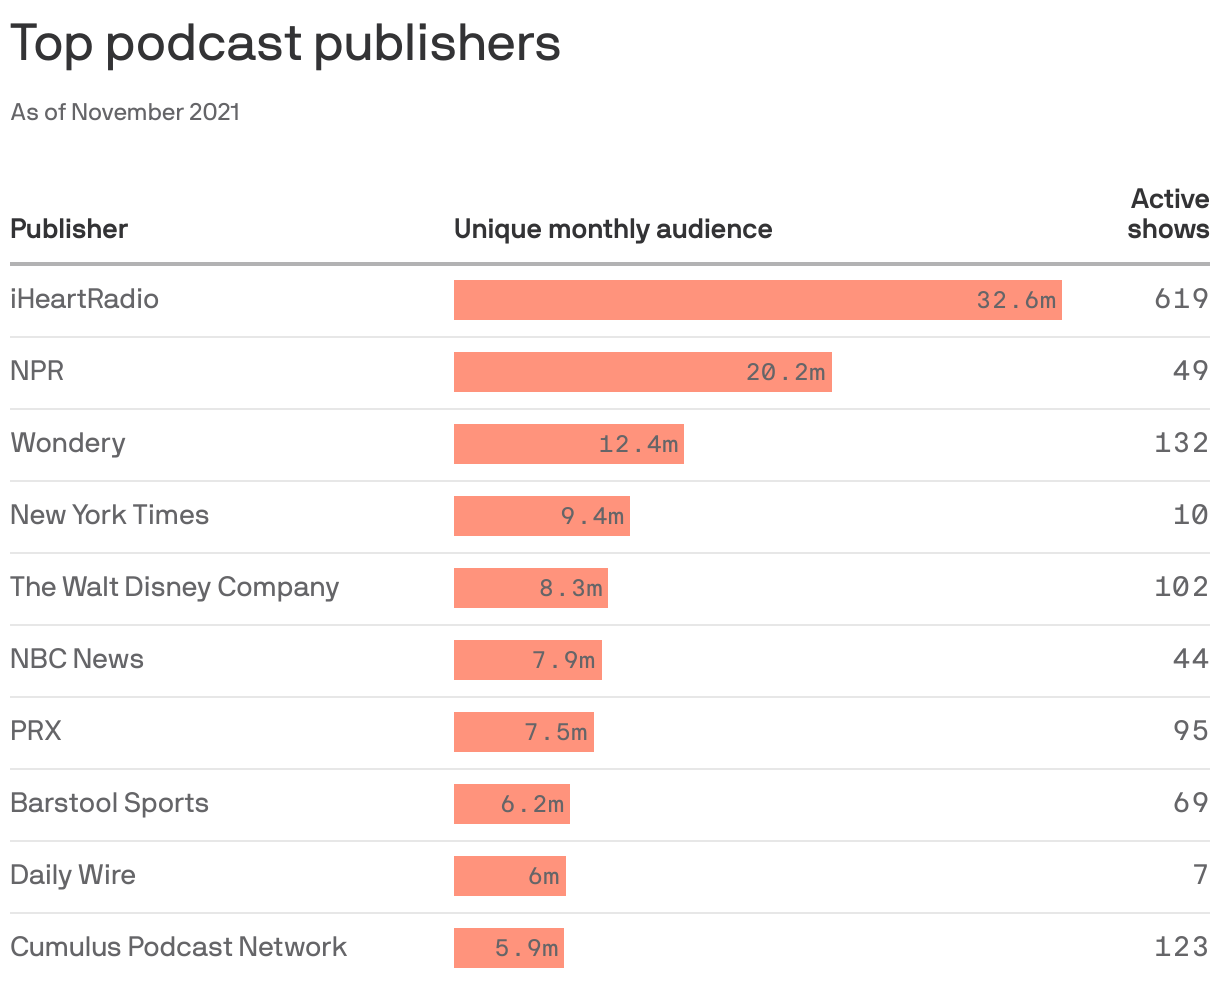 Top podcast publishers